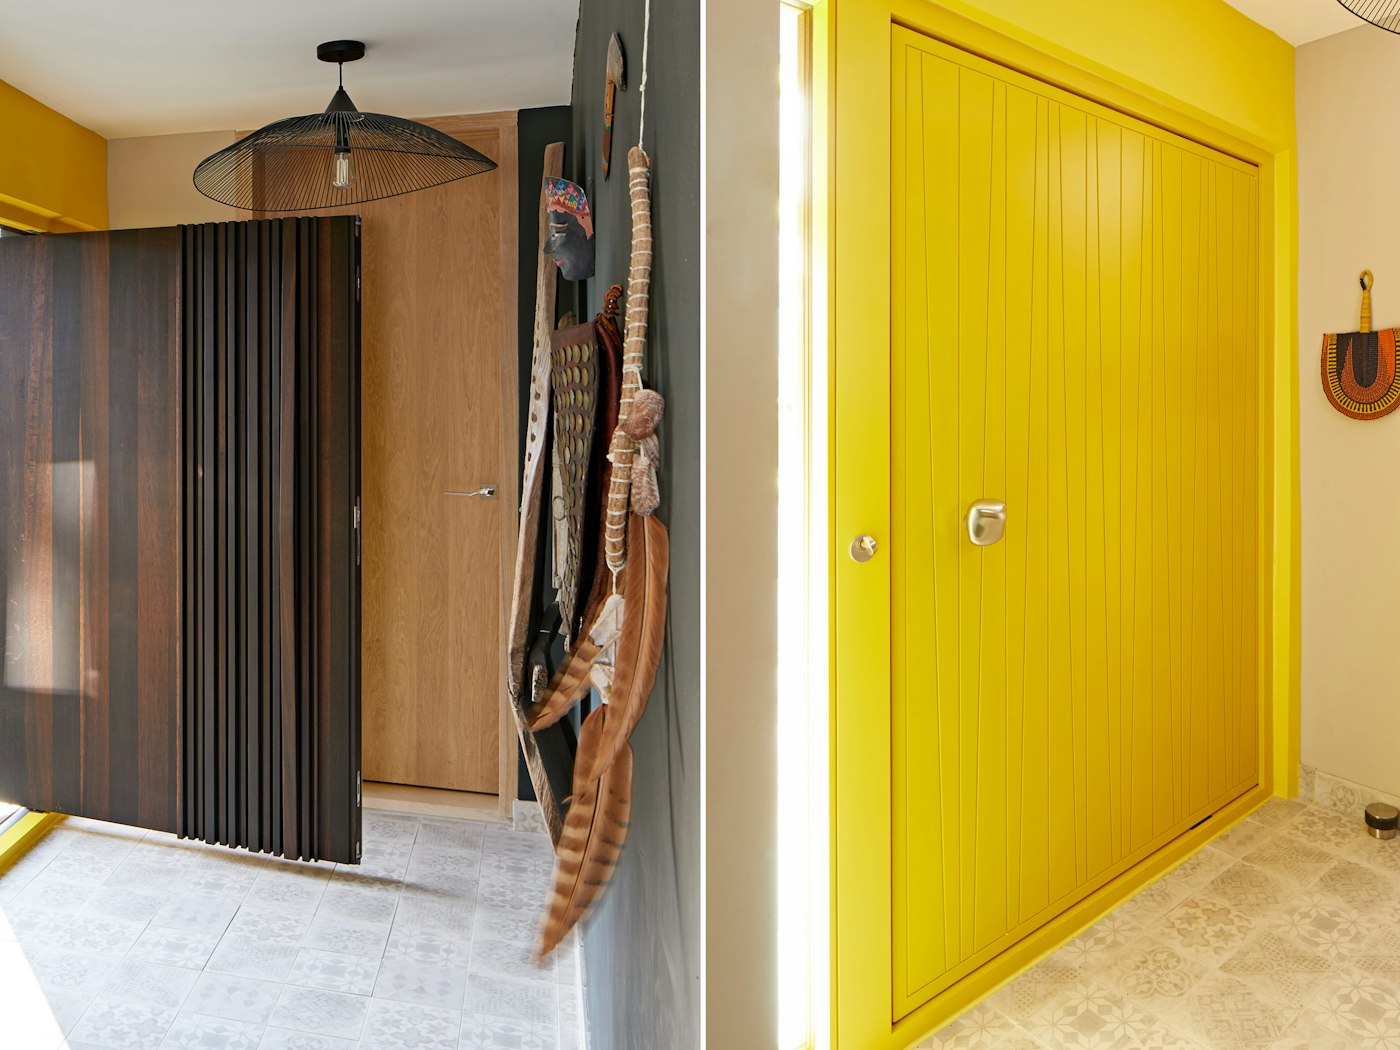 The inside features another standout style statement - our Milano V design in bold RAL-painted yellow